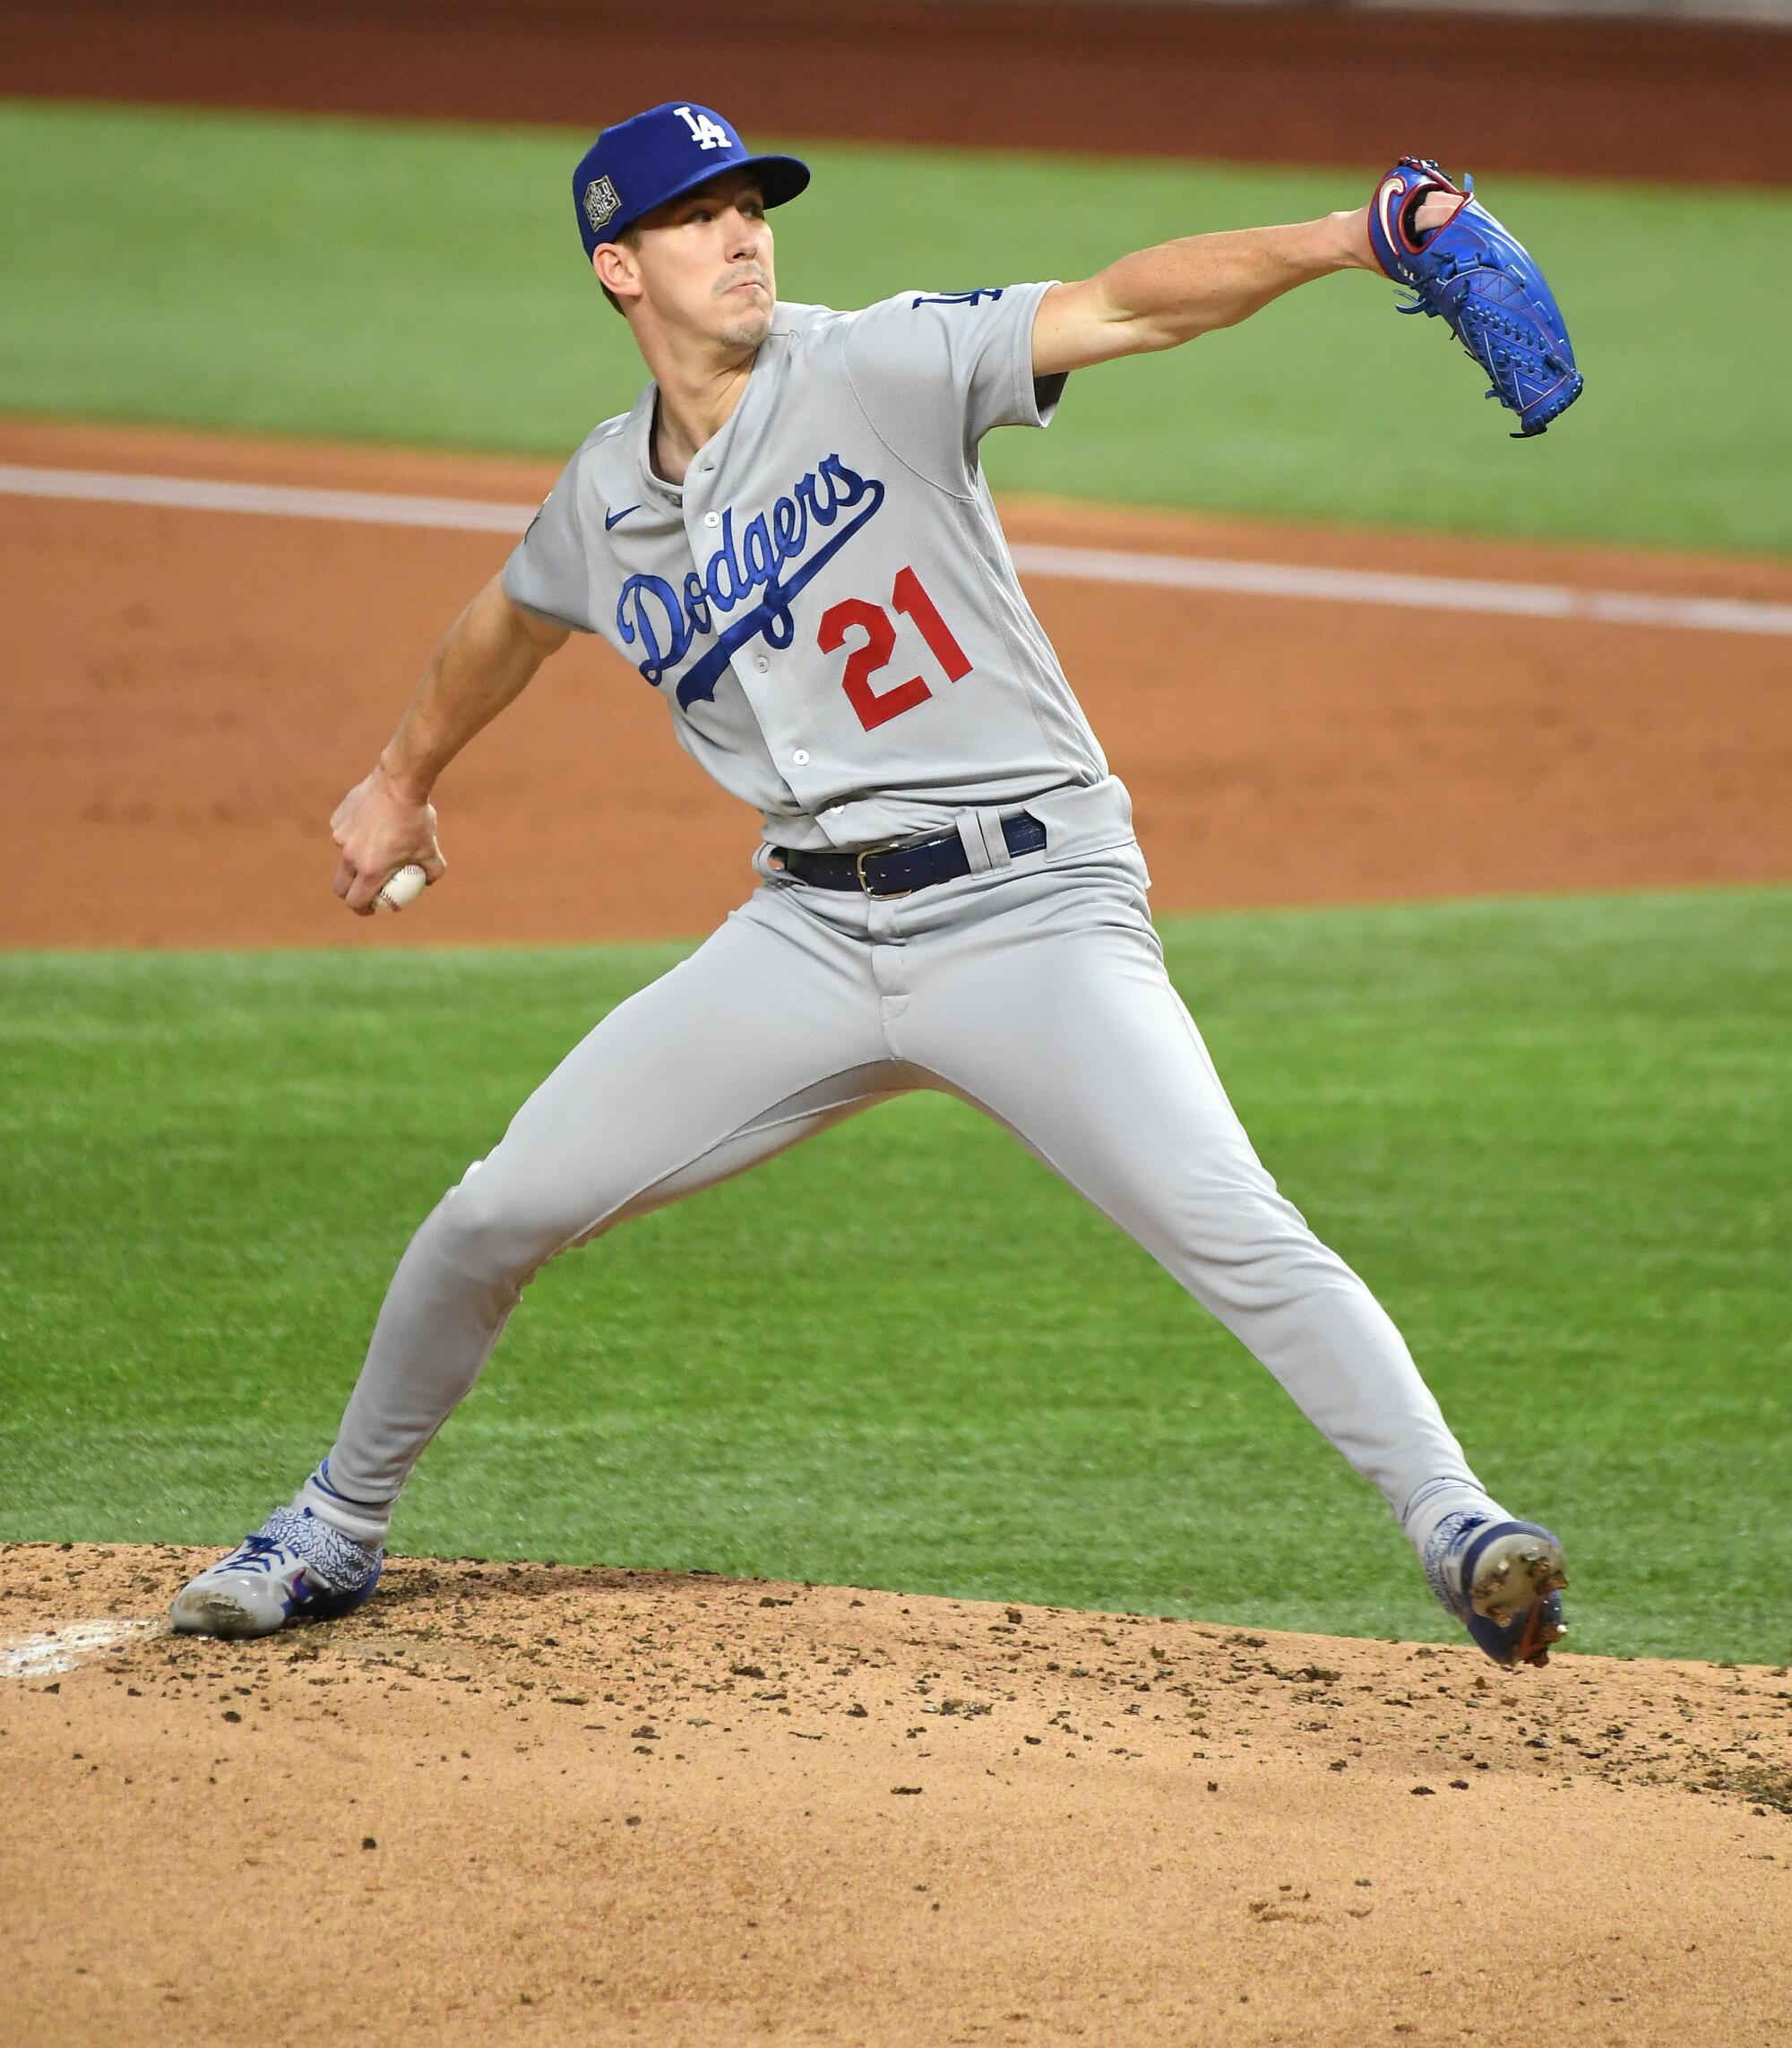 Walker Buehler threw a gem for the Dodgers, allowing only three hits and one run while striking out 10.